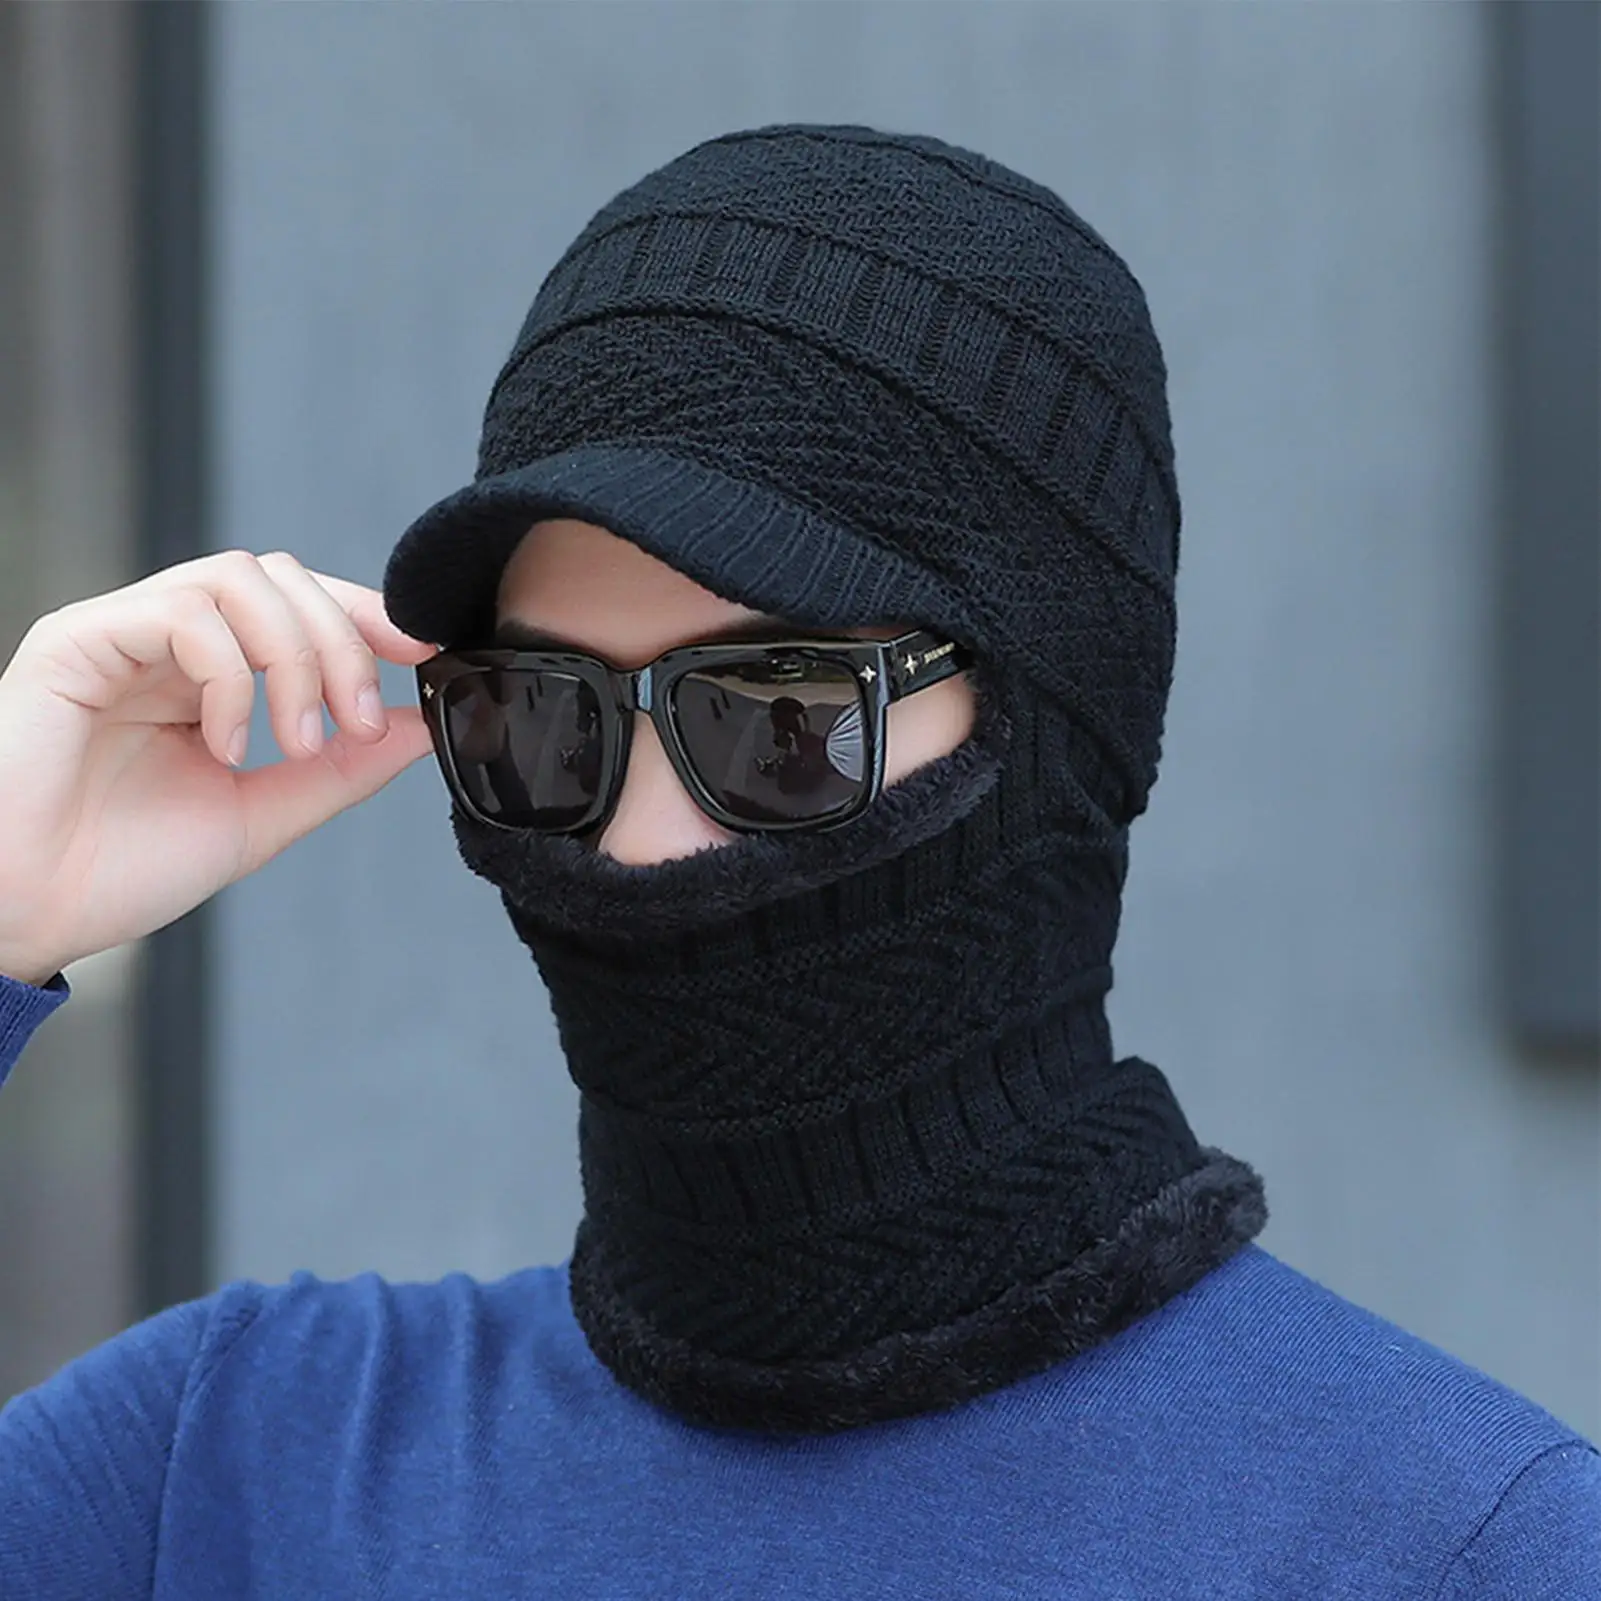 

Men Women Hats Winter Stretchy Knitted Hat Neck Gaiter Full Face Cover Warm Balaclava Thicken Soft Beanies Cap Female Male